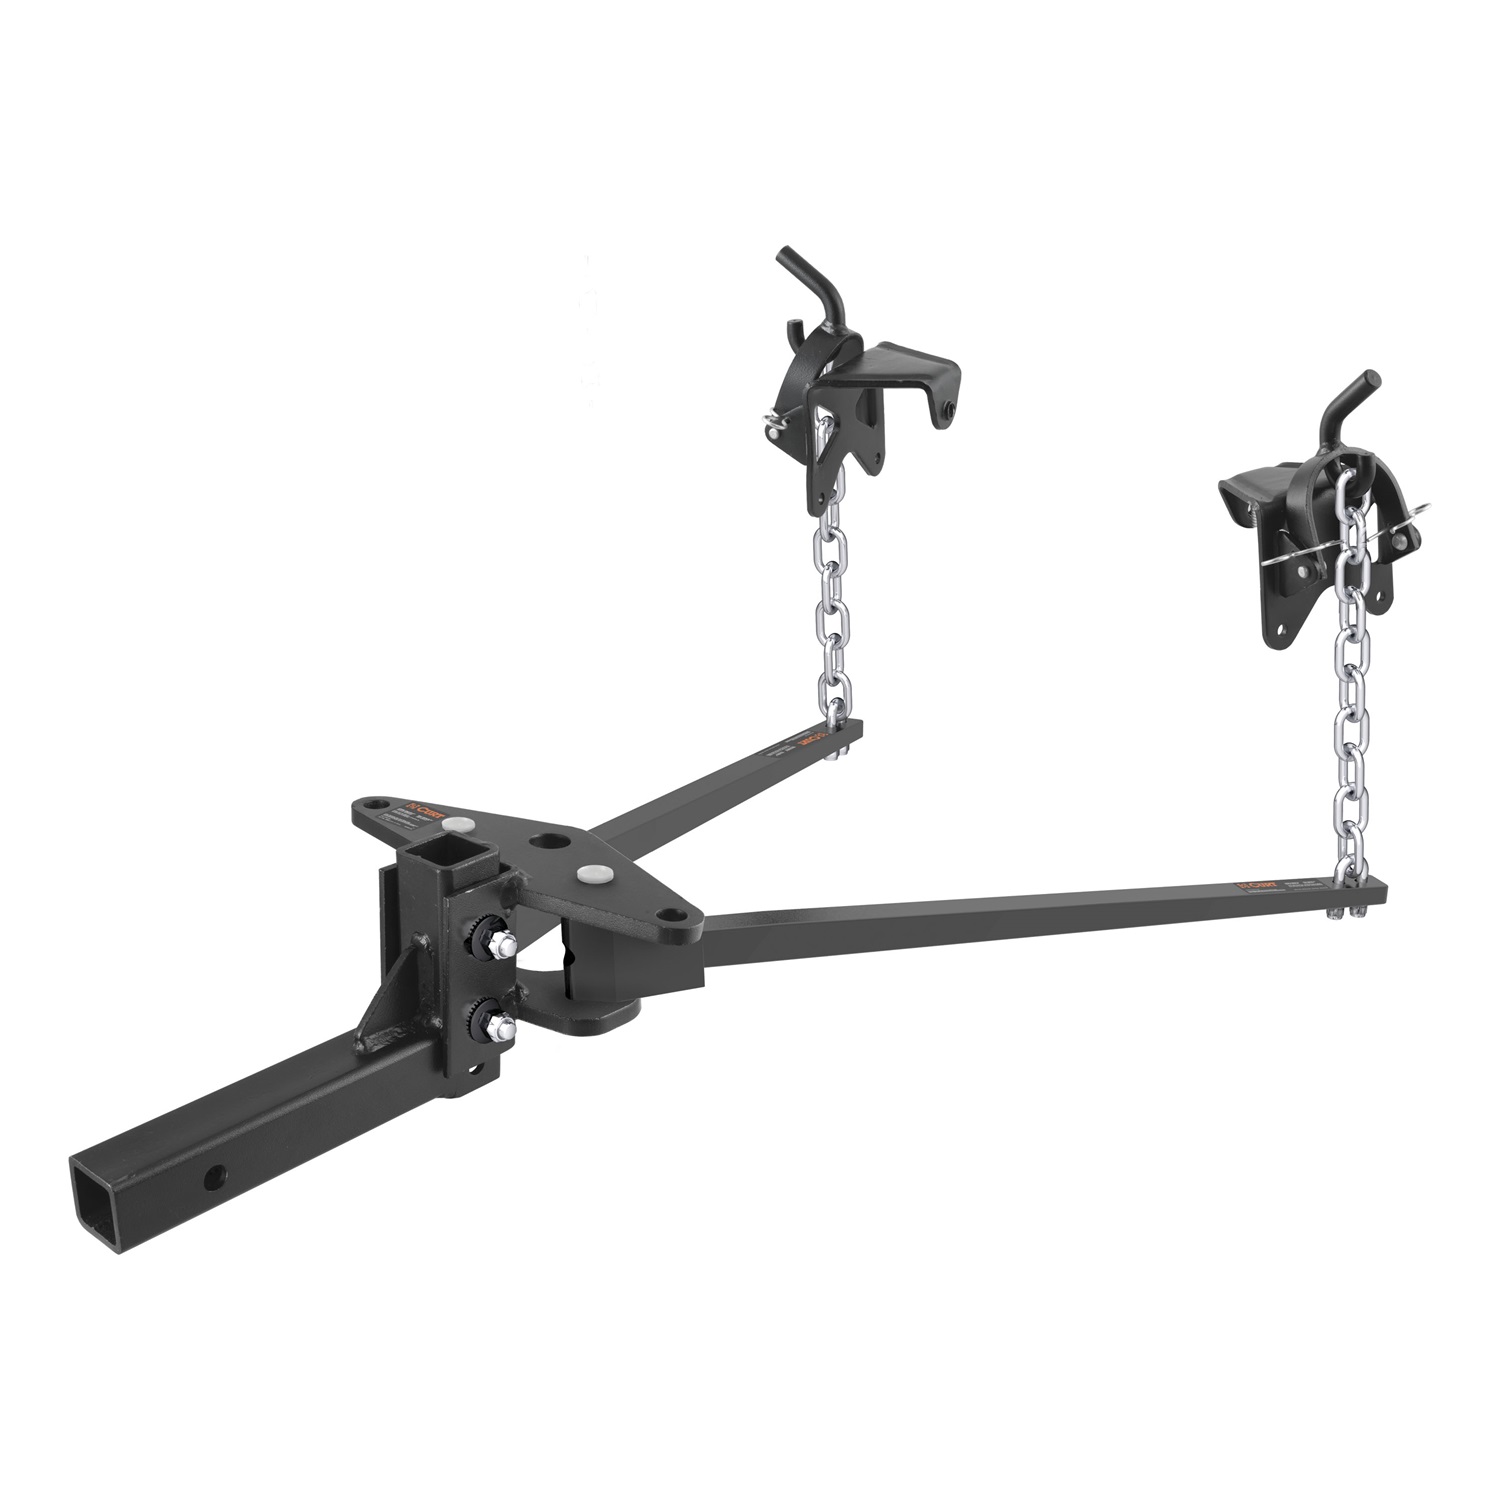 CURT Manufacturing CURT Manufacturing 17345 Weight Distribution Hitch; Trunion Spring Bar  Fits